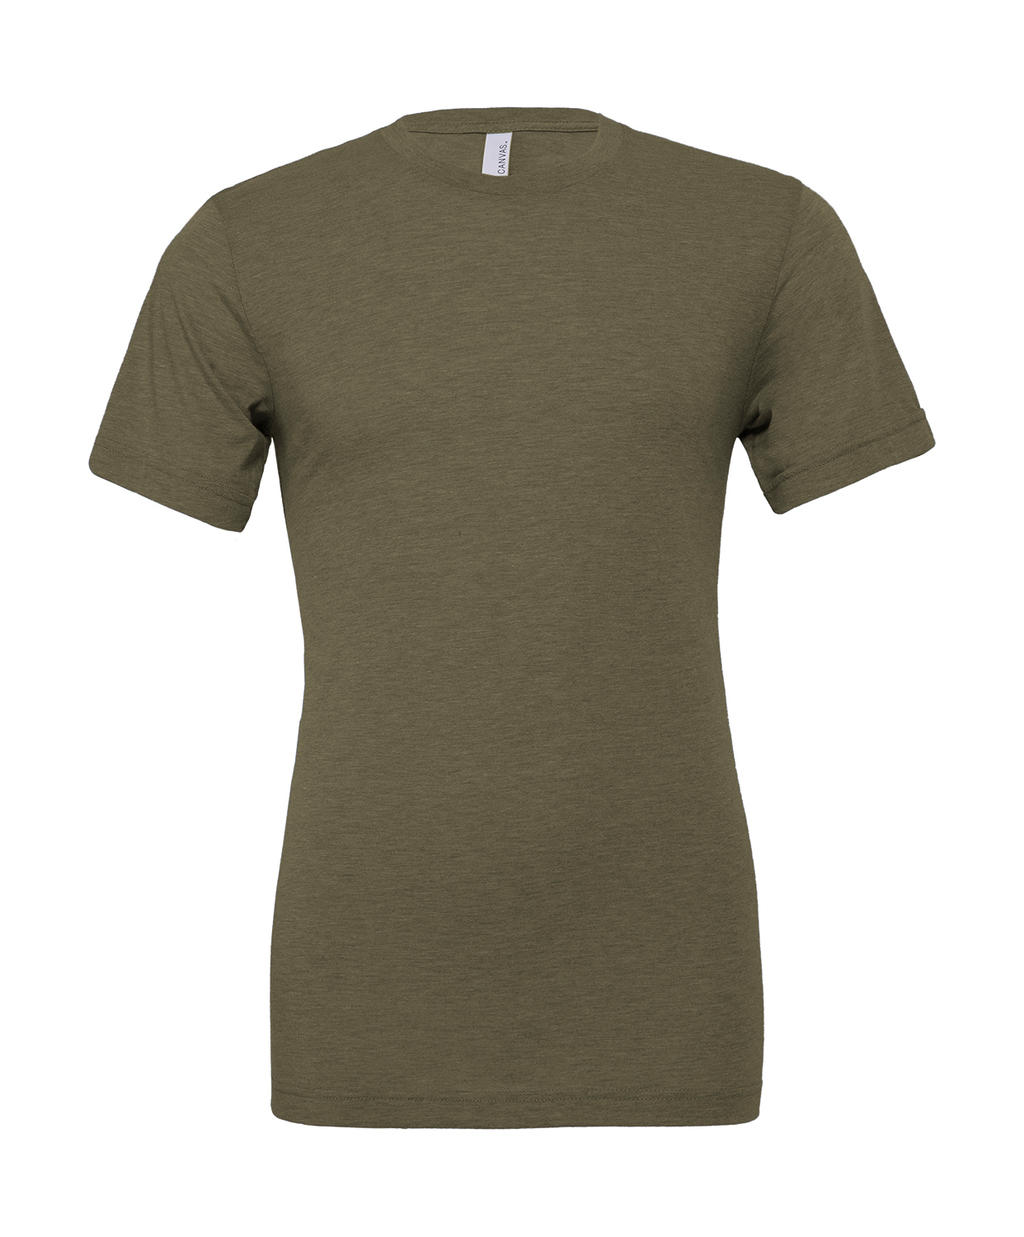  Unisex Triblend Short Sleeve Tee in Farbe Military Green Triblend